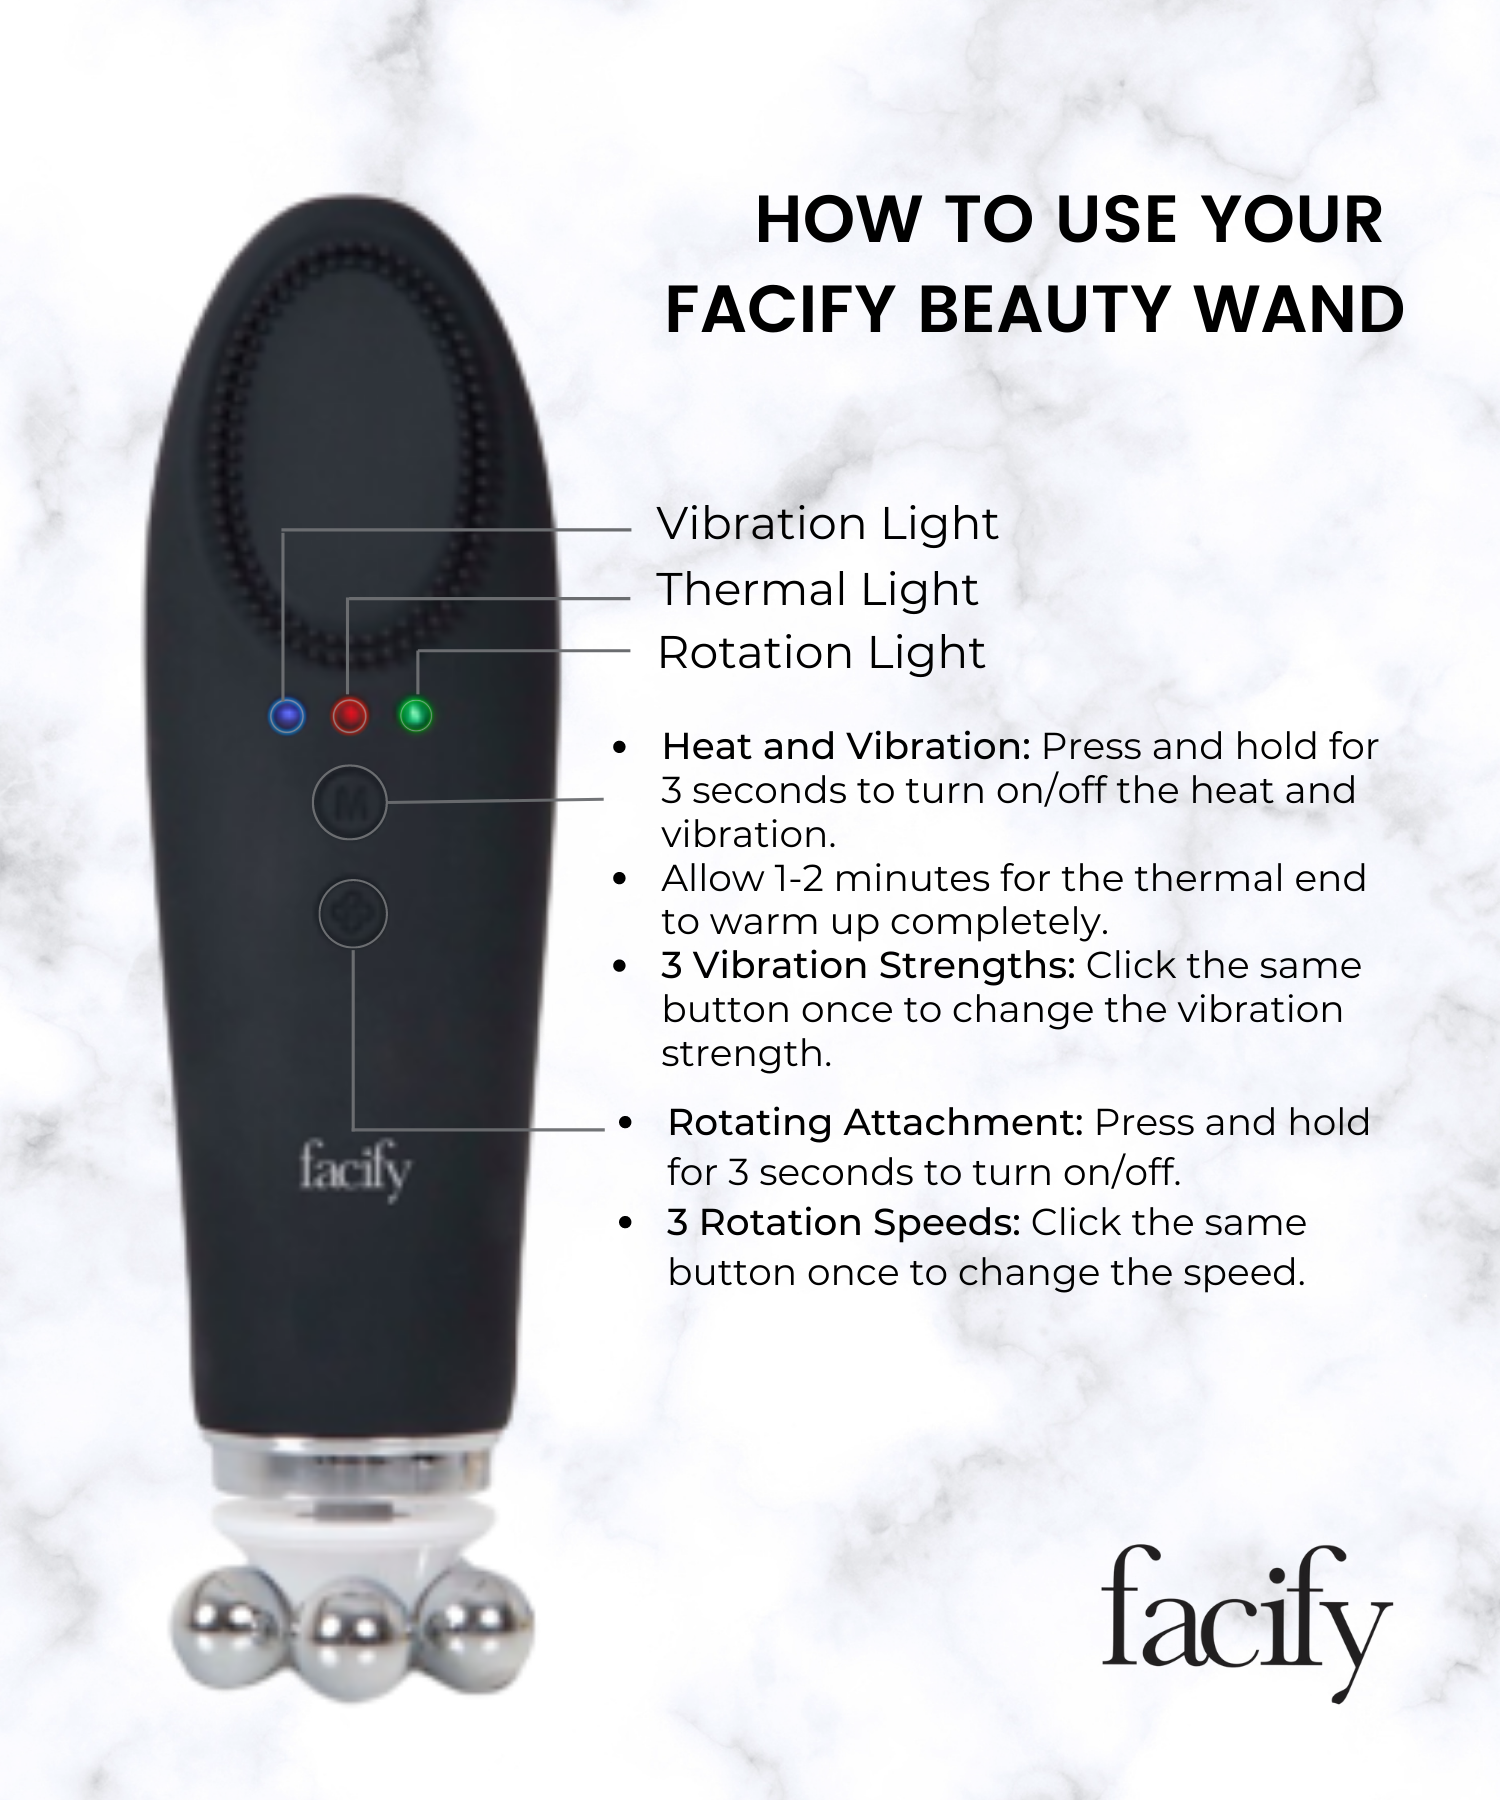 instruction manual for how to use the facify beauty wand and what all the lights and buttons mean